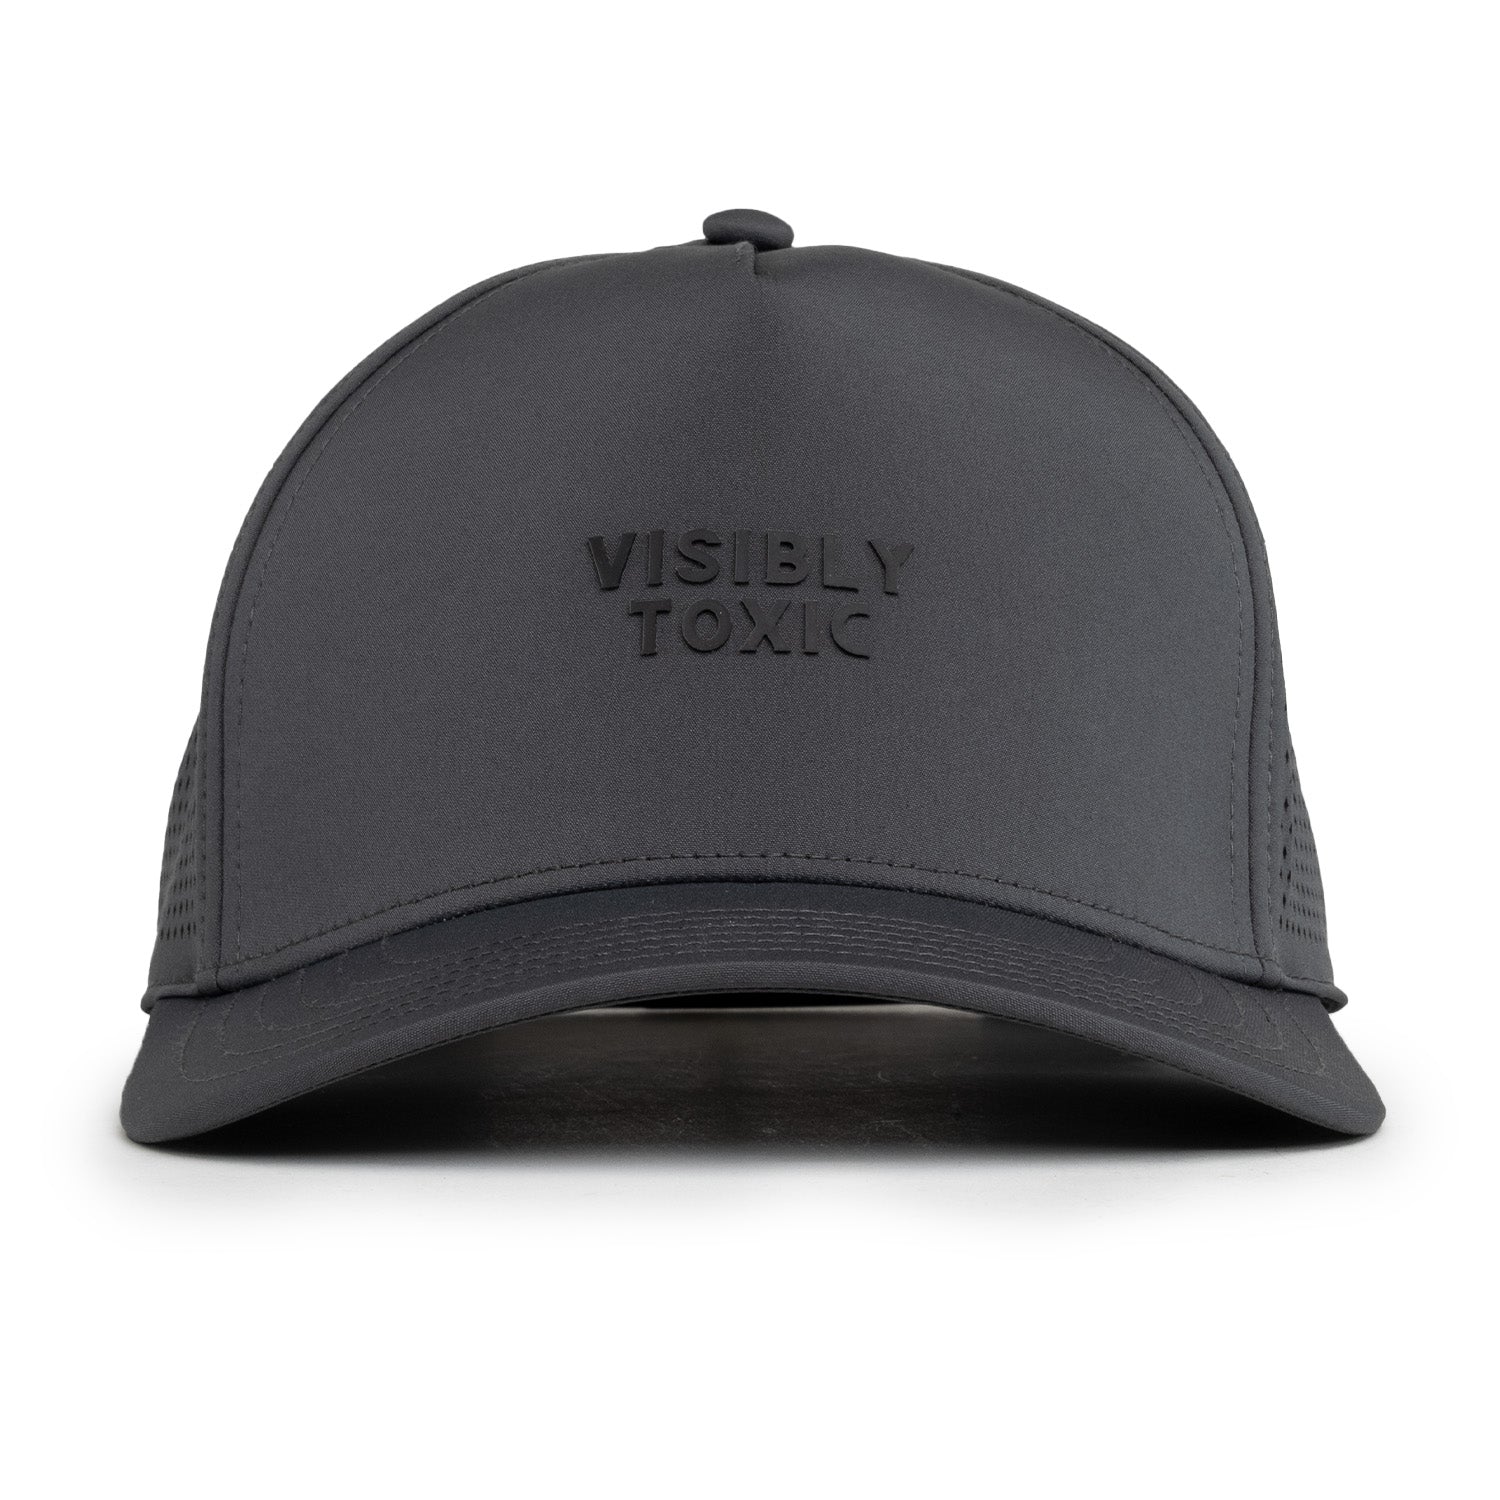 Visibly Toxic Gray Embroidered Hat